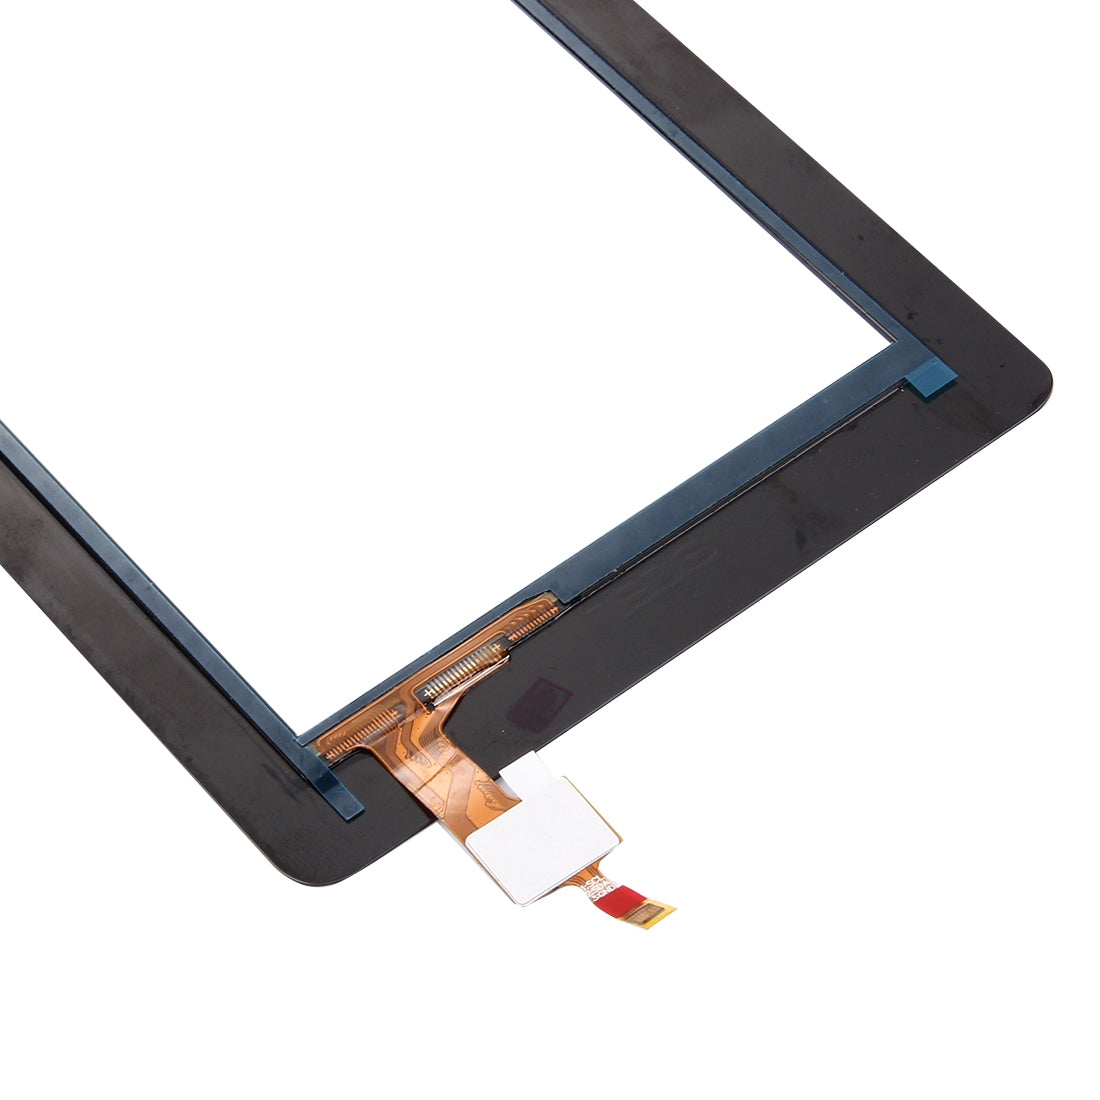 Touch Screen Digitizer Acer Iconia One 7 B1-730 Black